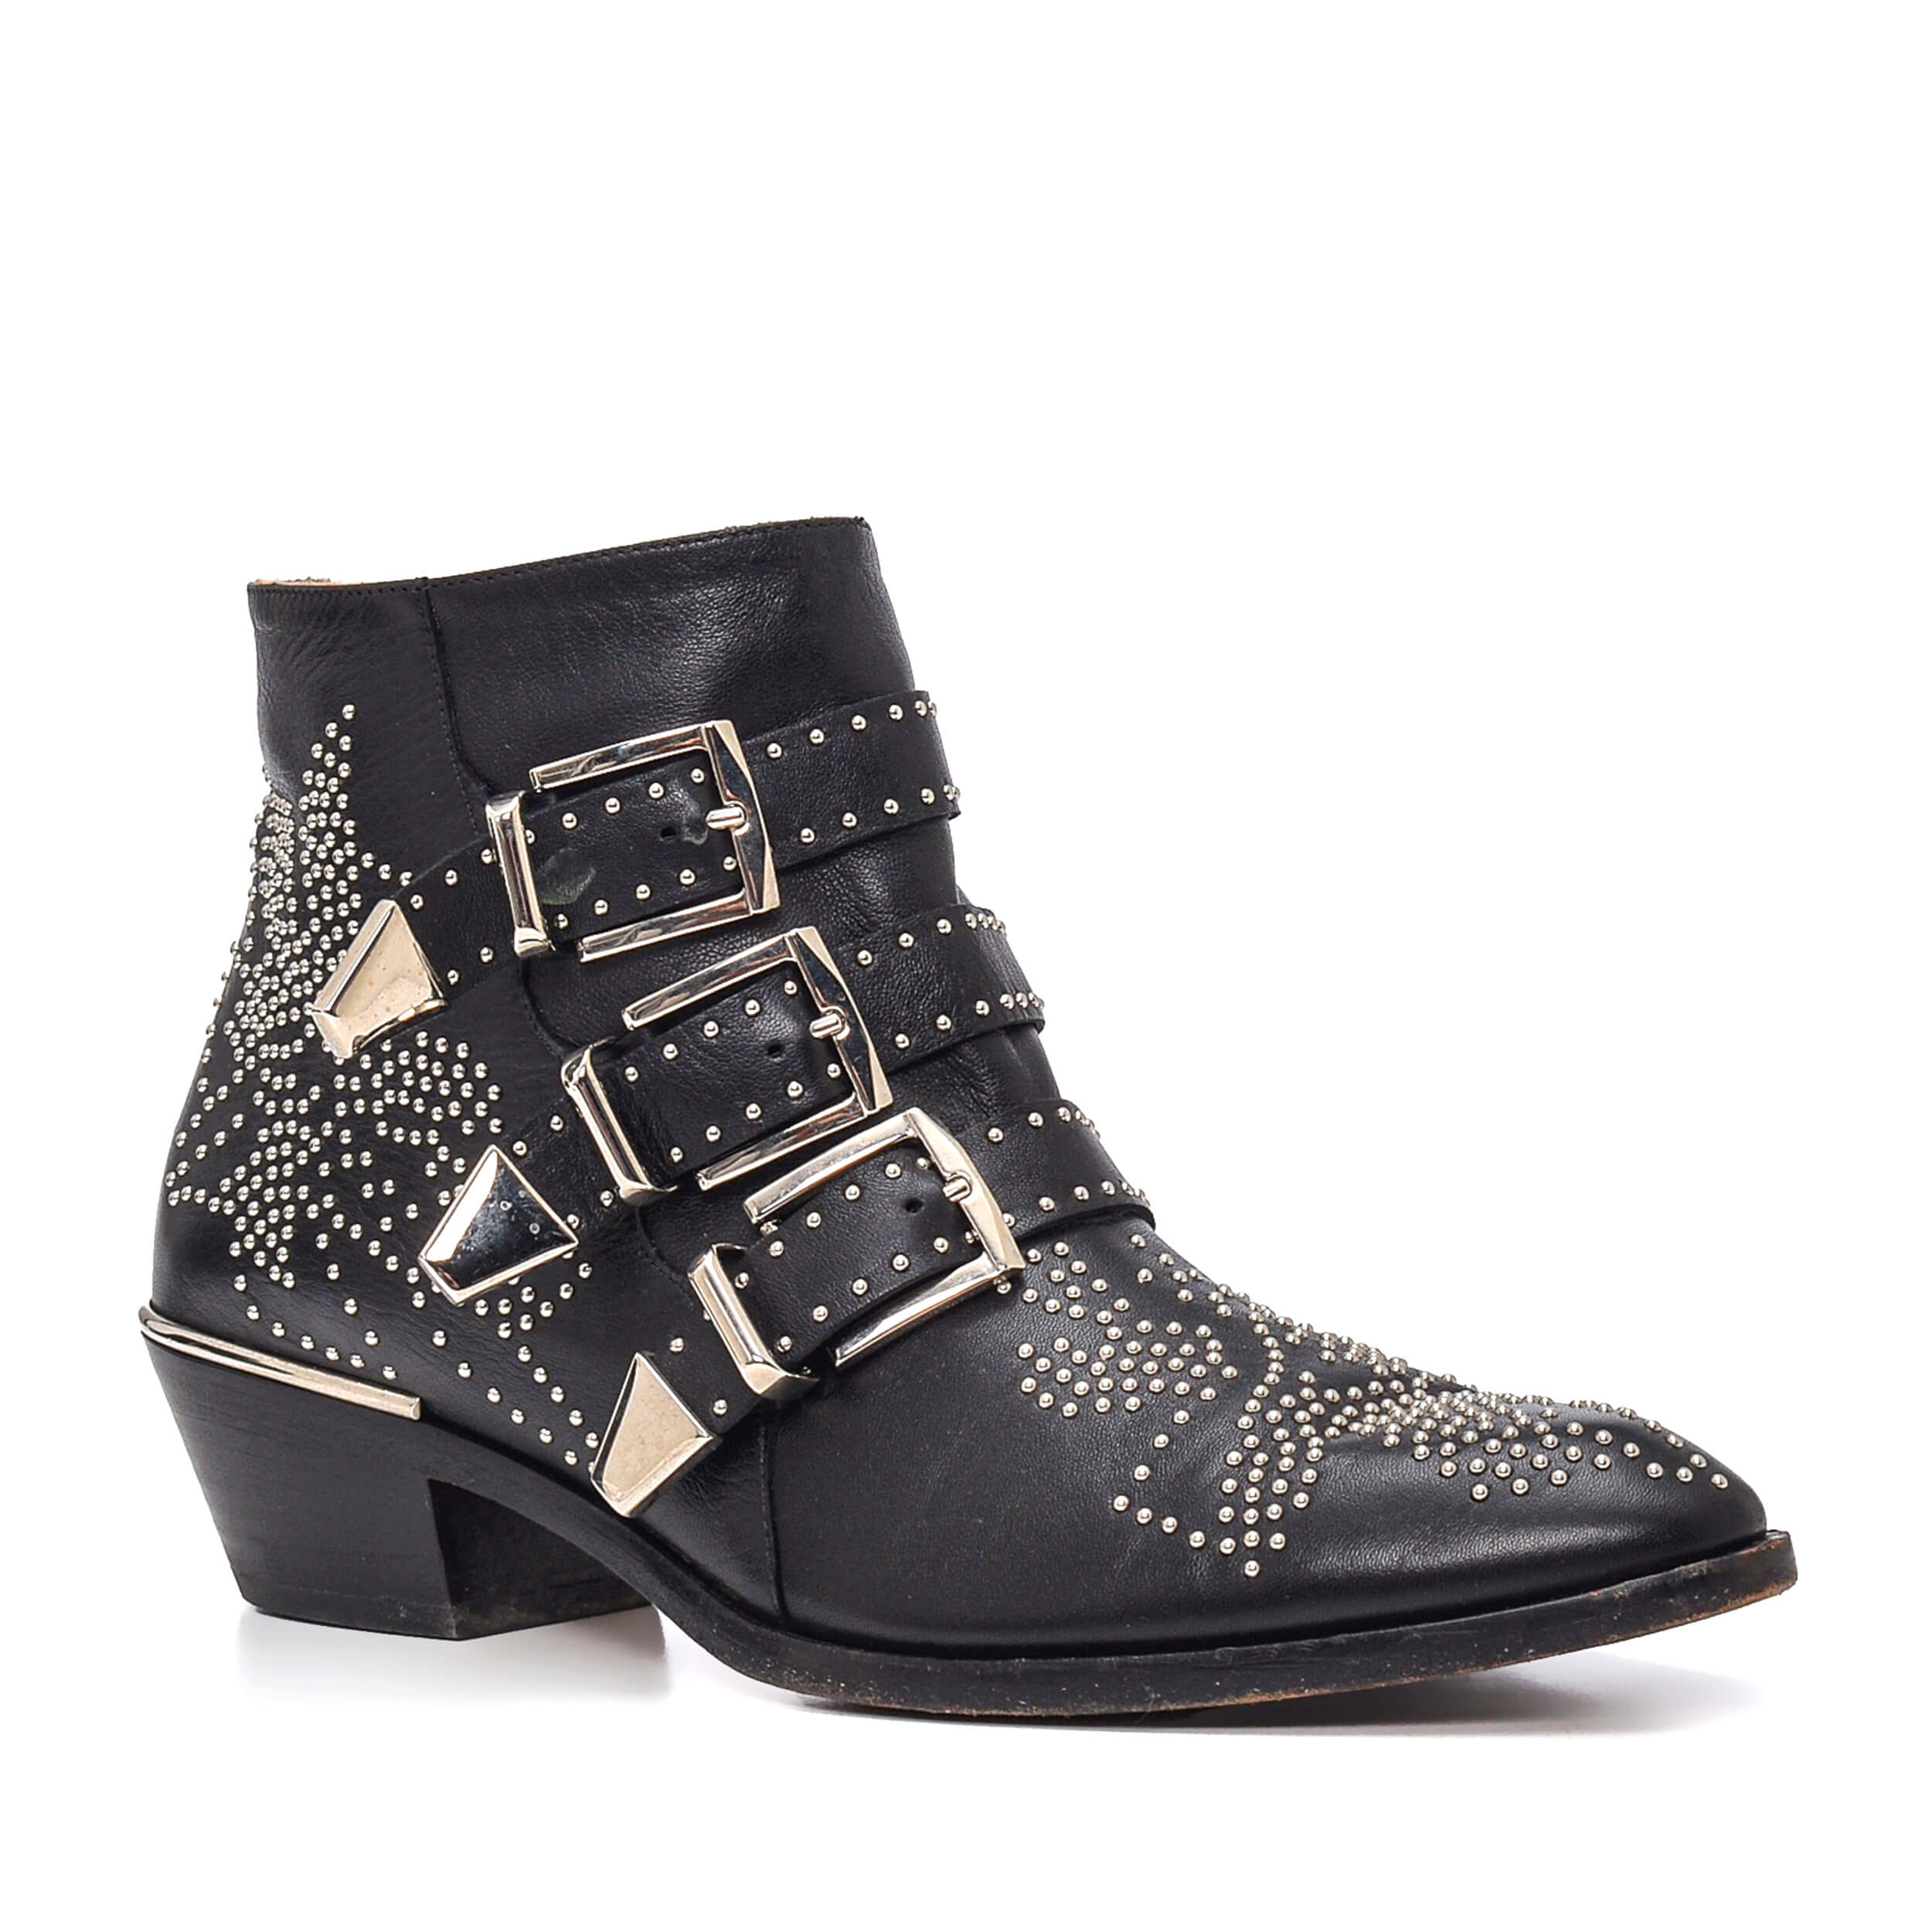 Chloe - Black Smooth Nappa Leather Strapped & Studded Susanna Boots III